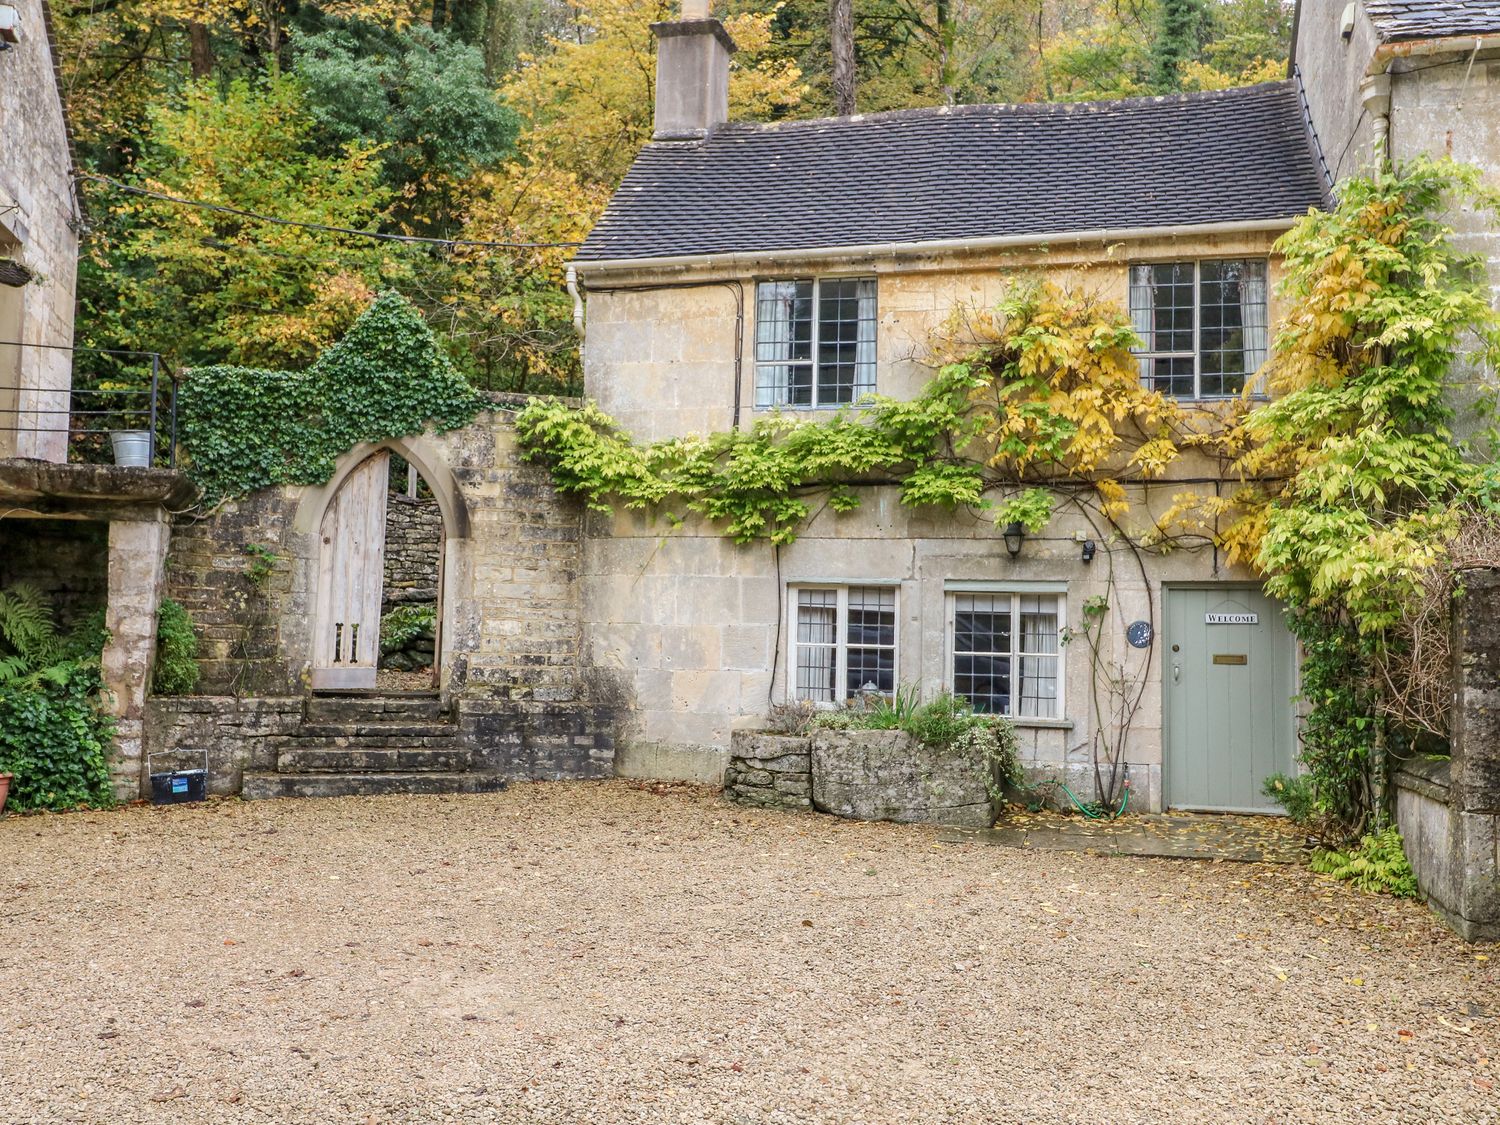 October Cottage - Cotswolds - 1030106 - photo 1